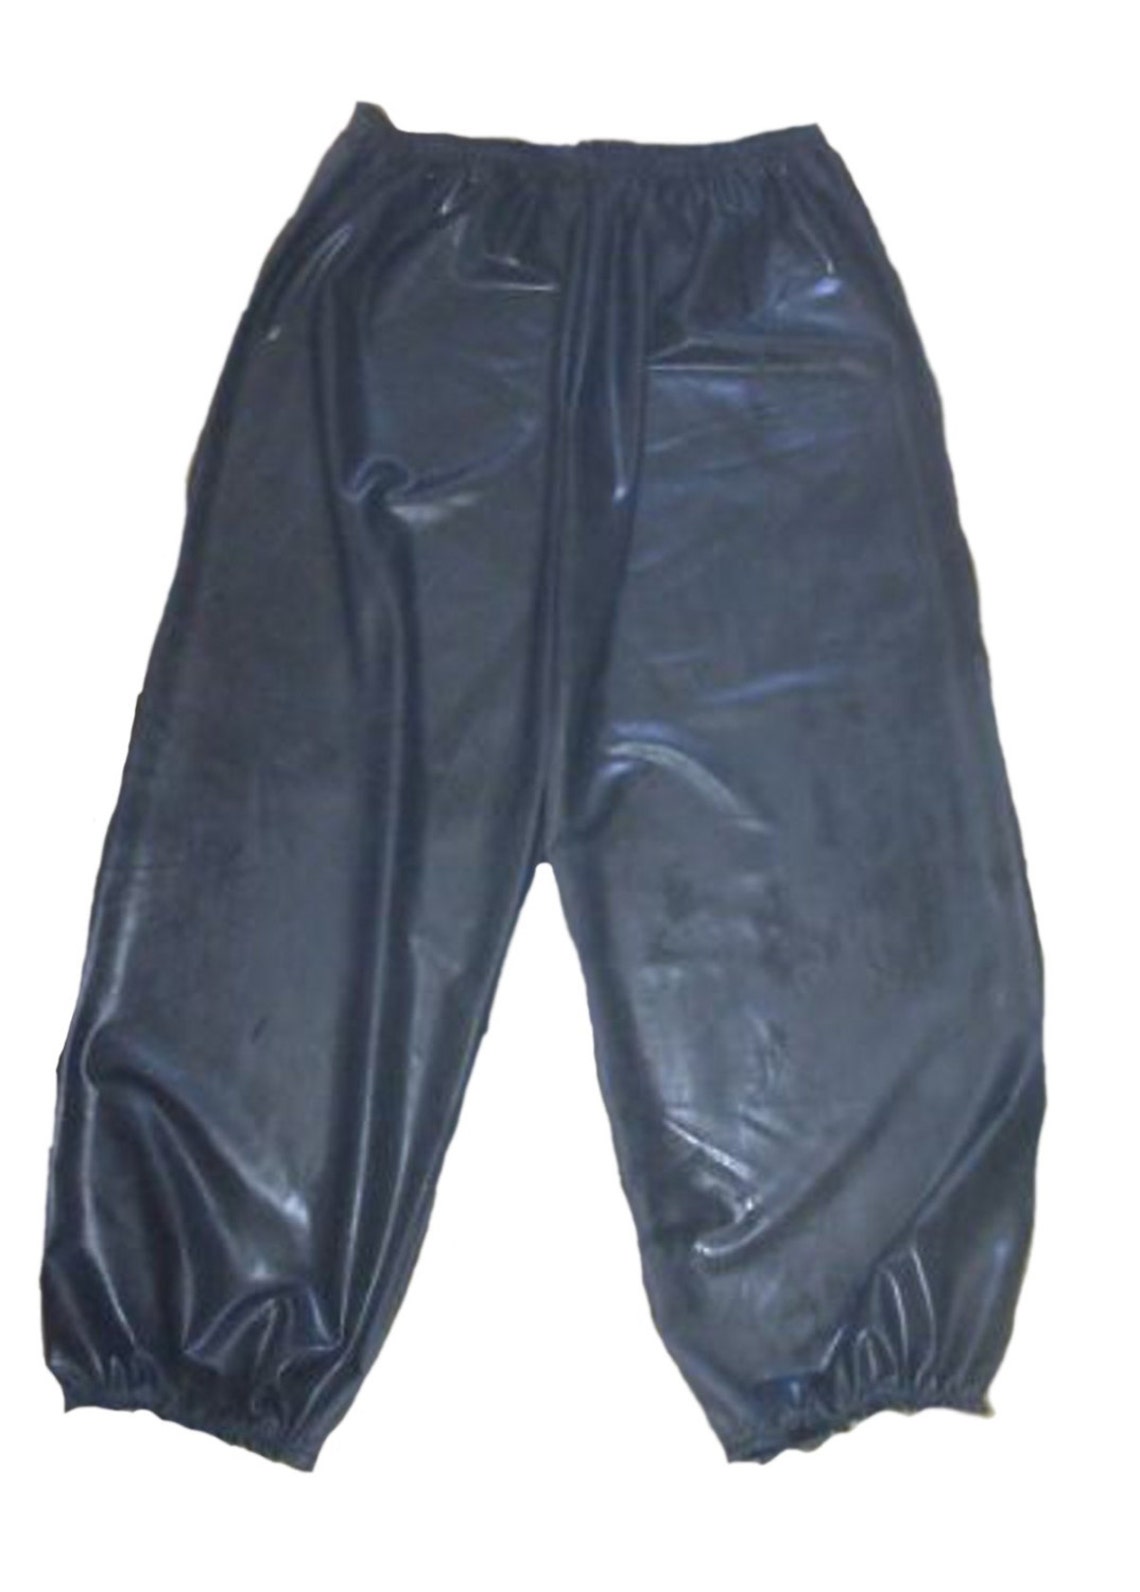 Black Rubber Trousers silicone / Latex Mix Pants Joggers - Etsy UK